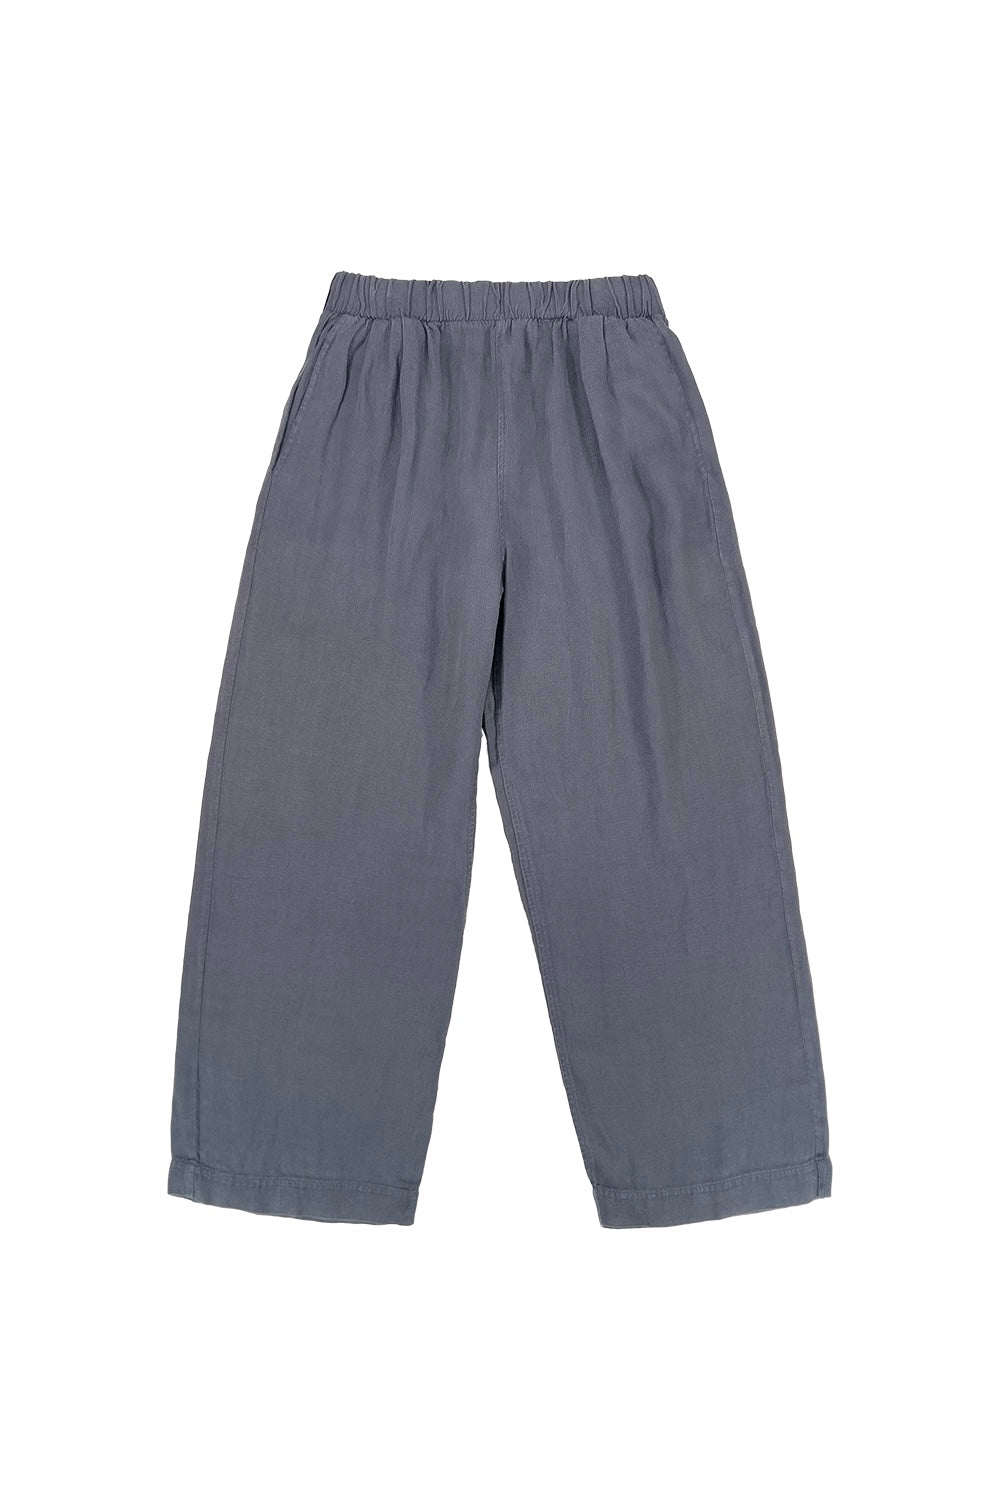 Cambria Pant | Jungmaven Hemp Clothing & Accessories / Color: Diesel Gray